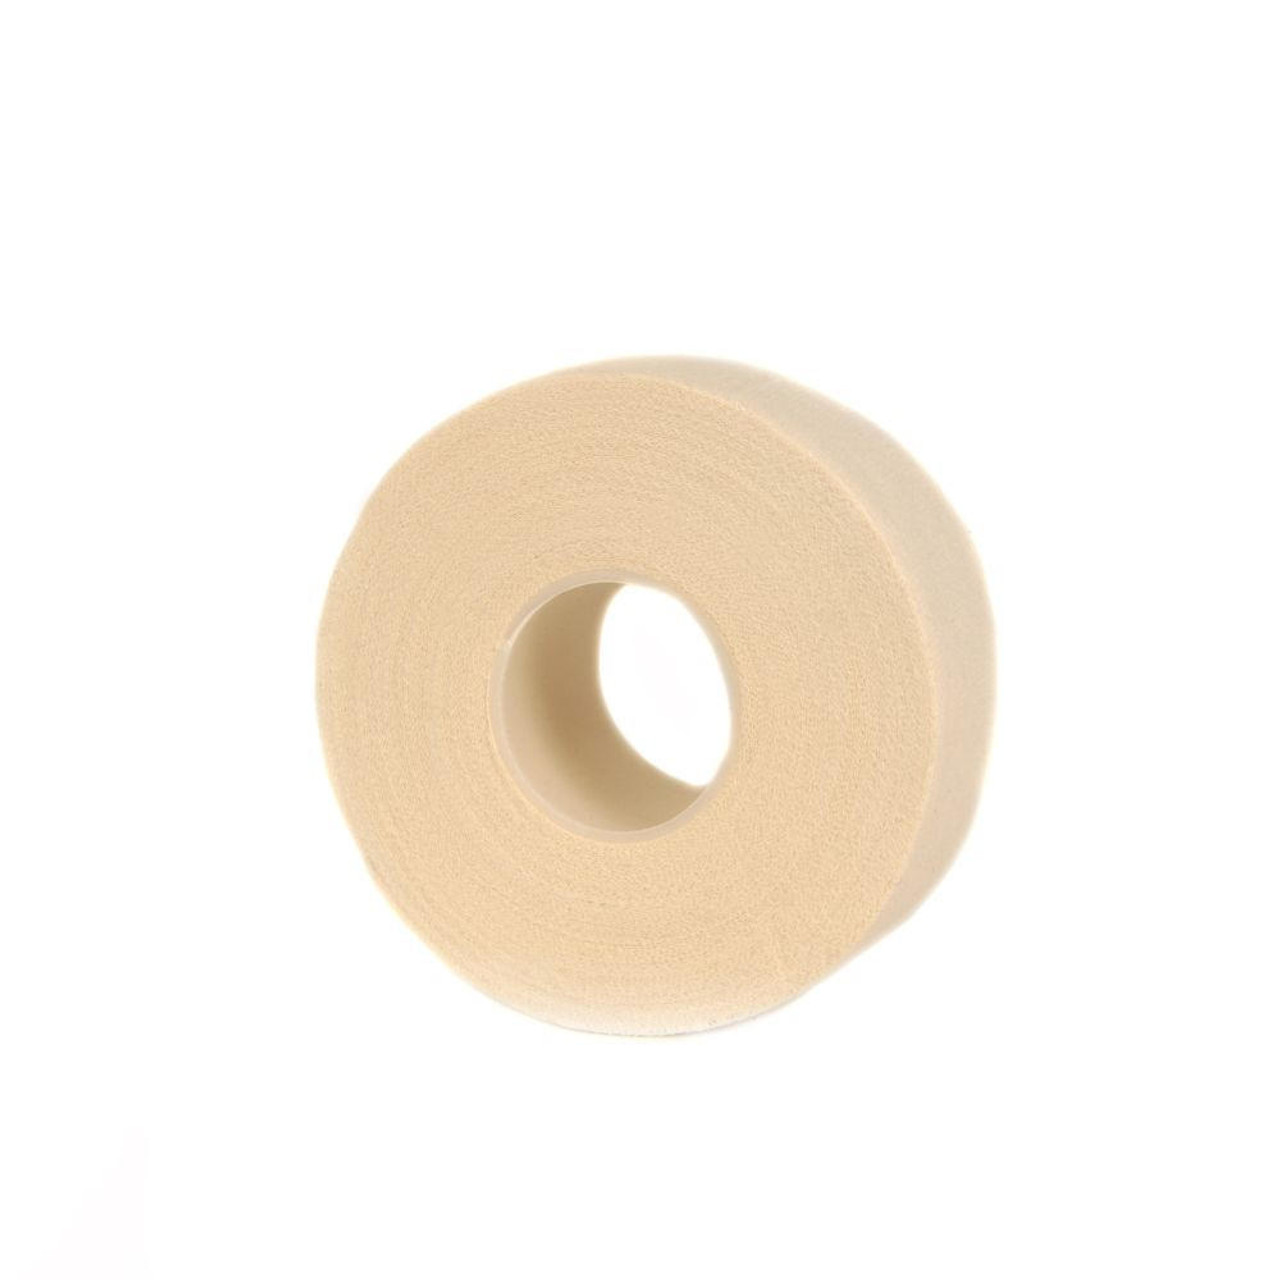  Zinc Oxide Sports Tape for Rigid Strapping 1.25cmx10m 